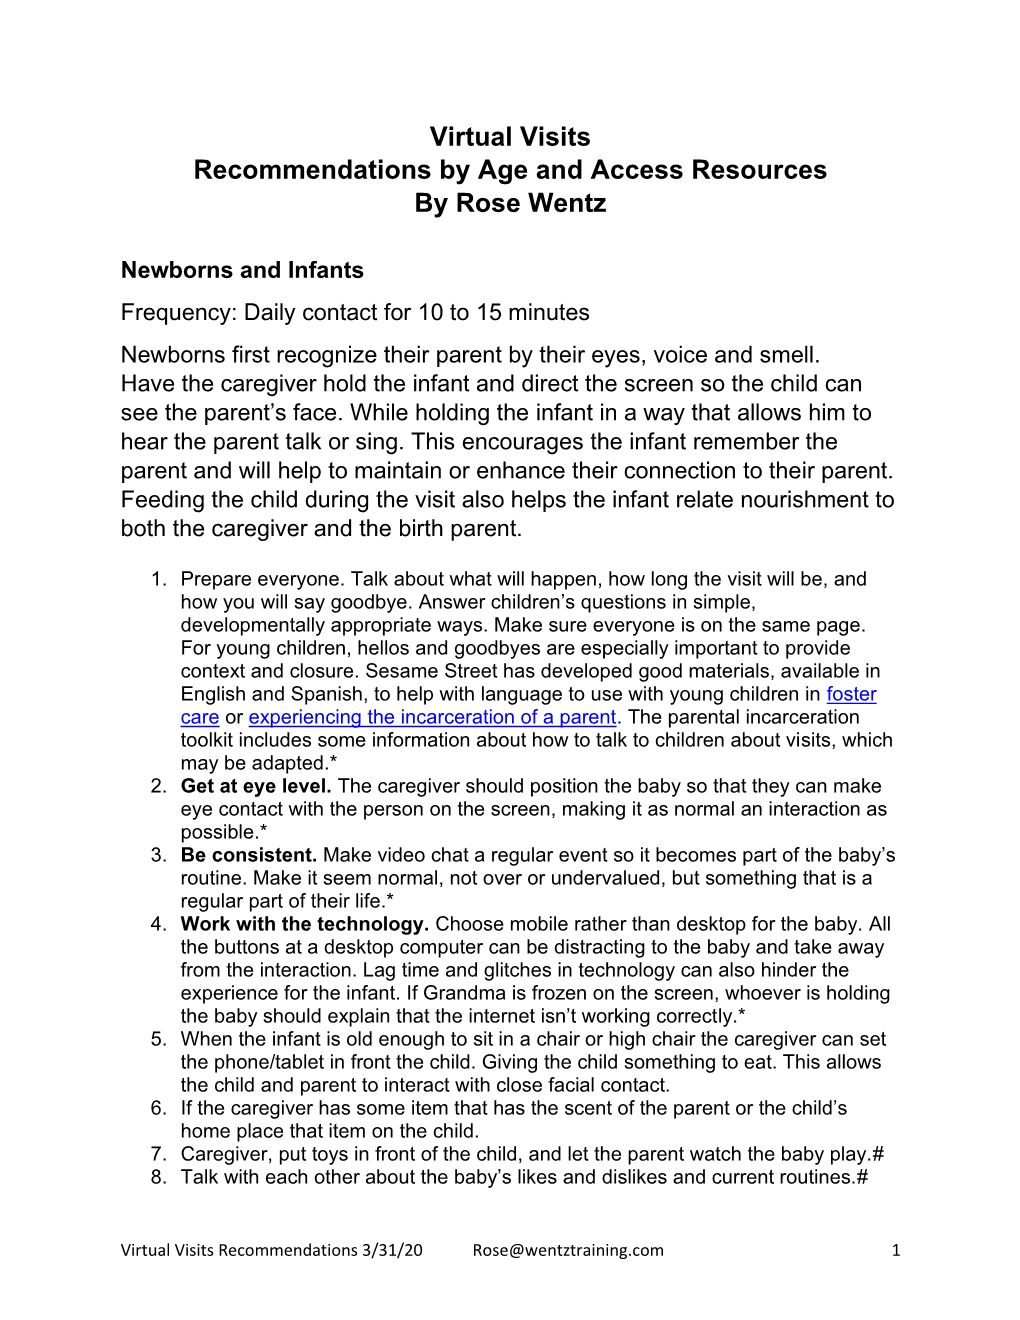 Virtual Visits Recommendations by Age and Access Resources by Rose Wentz